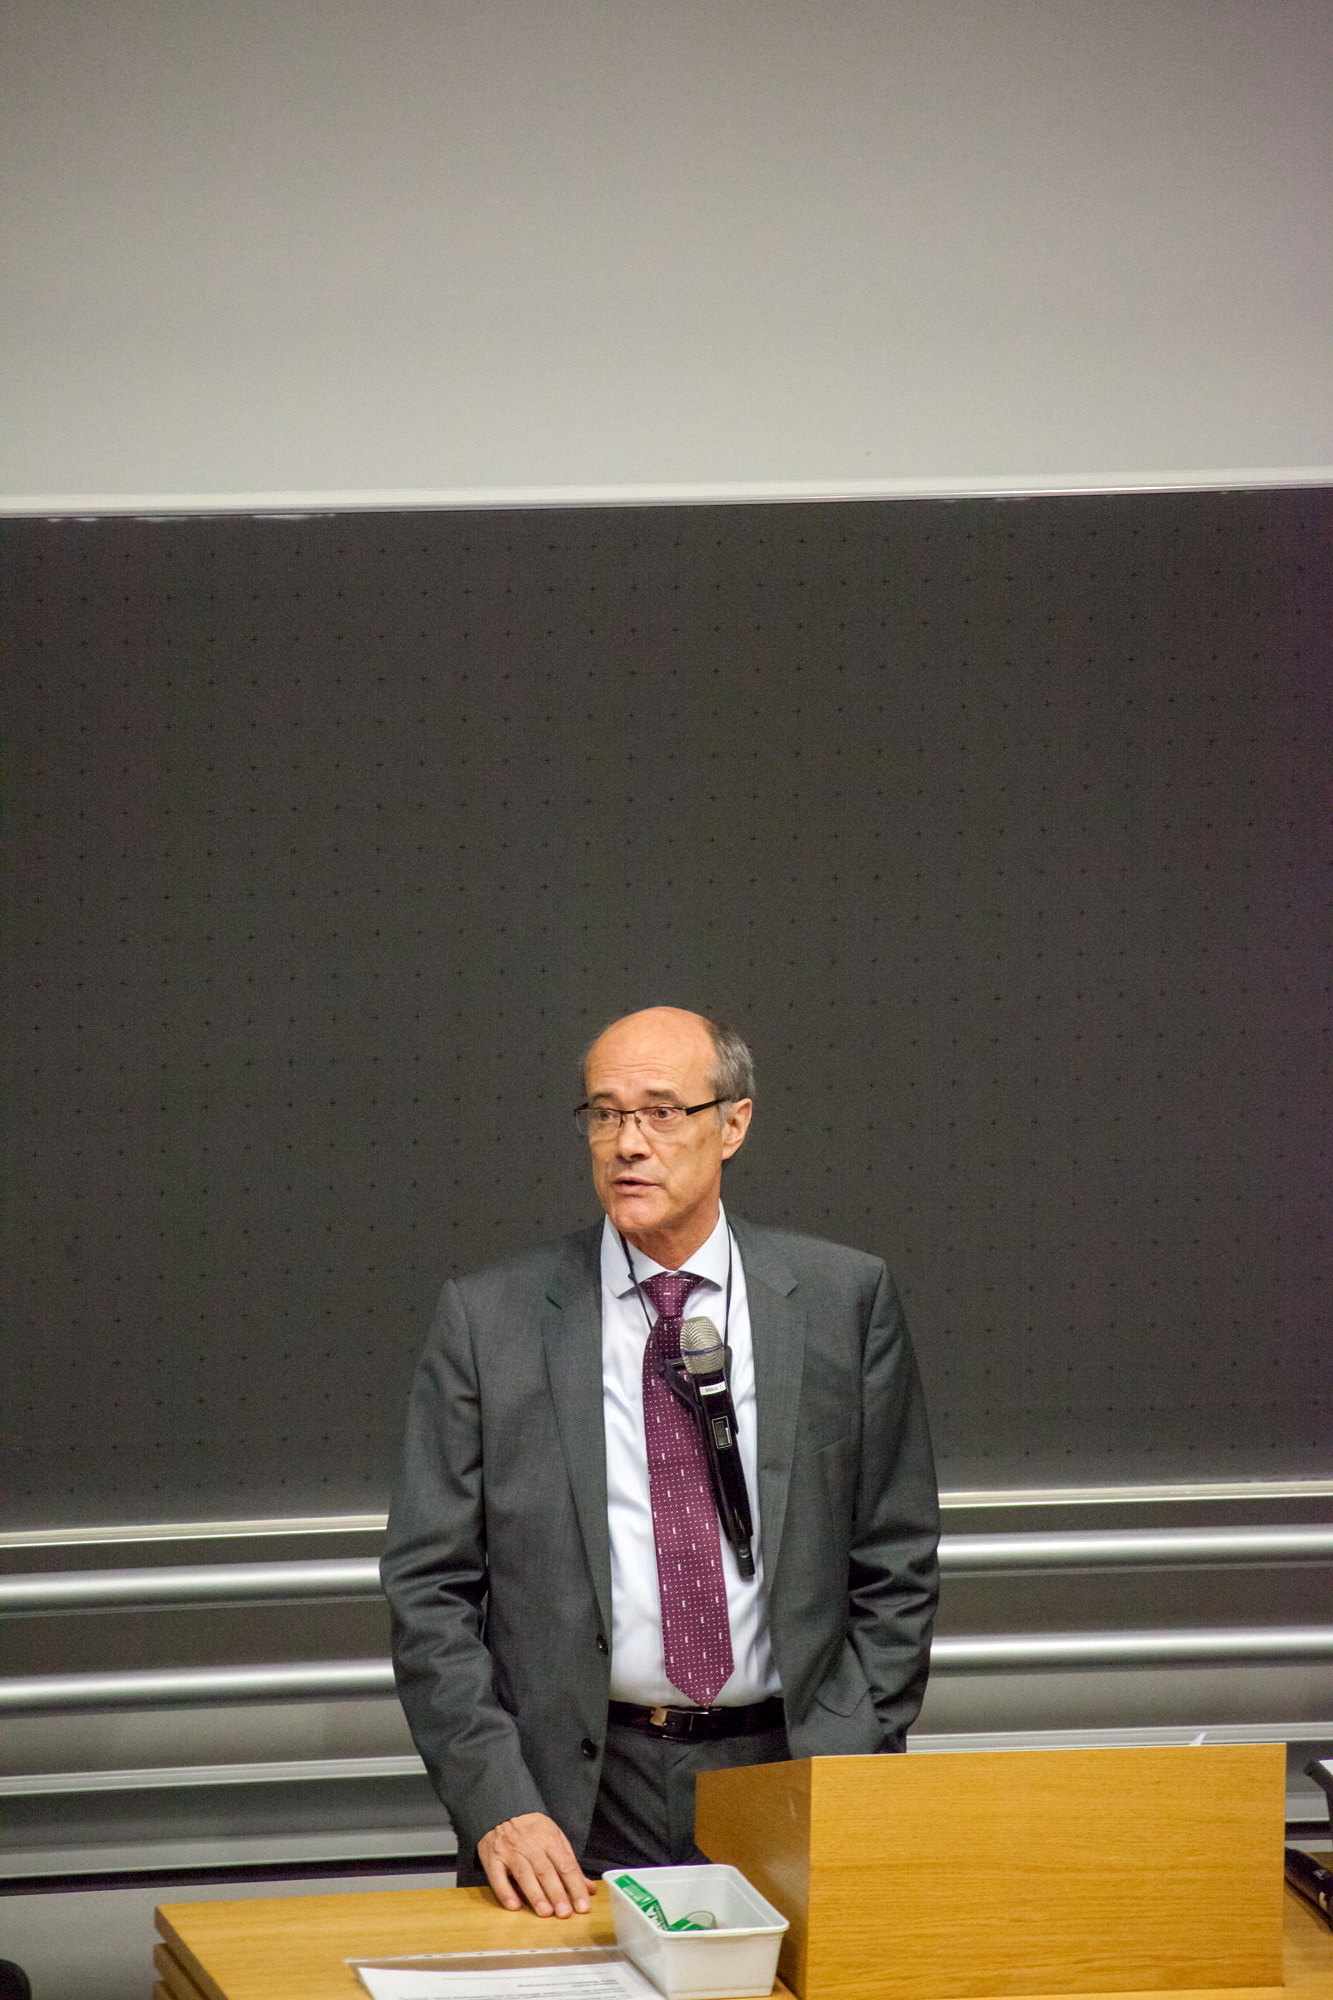 Representing FAU during the opening session: Prof. Dr. Günter Leugering (Vice President Research)